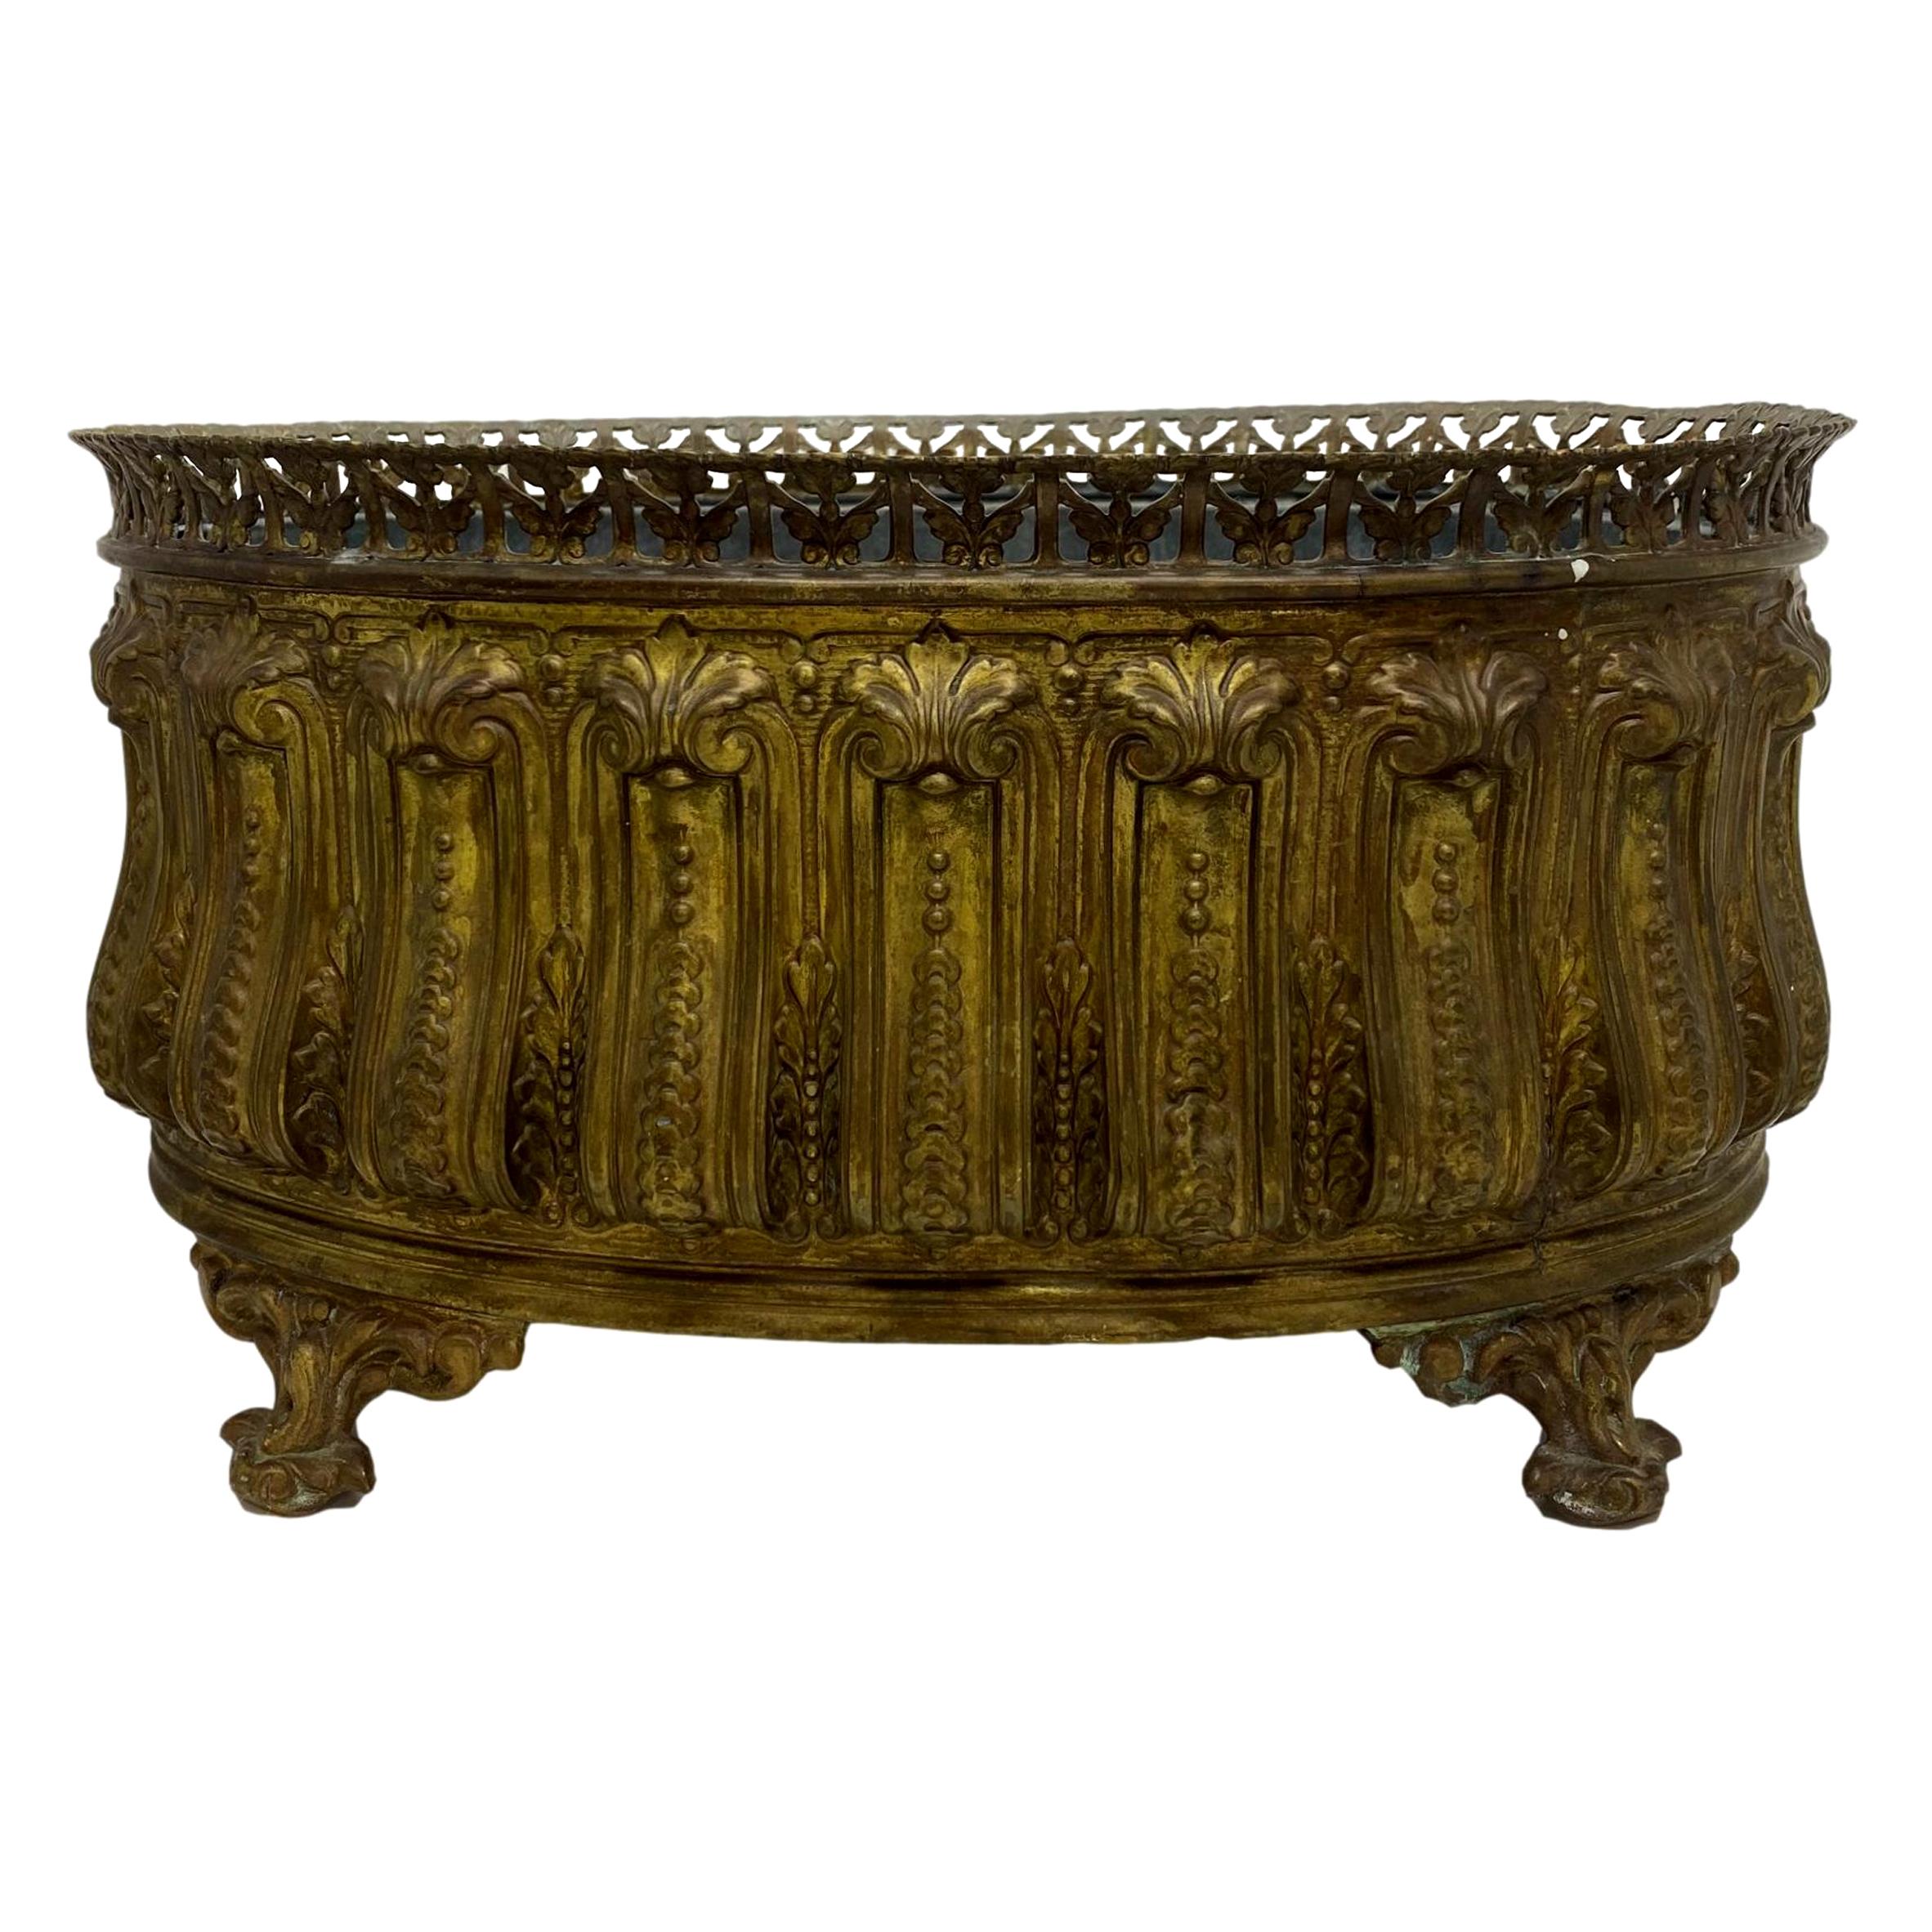 Brass Repousse Cachepot, 2nd Empire, with Original Zinc Lining, French, ca. 1860